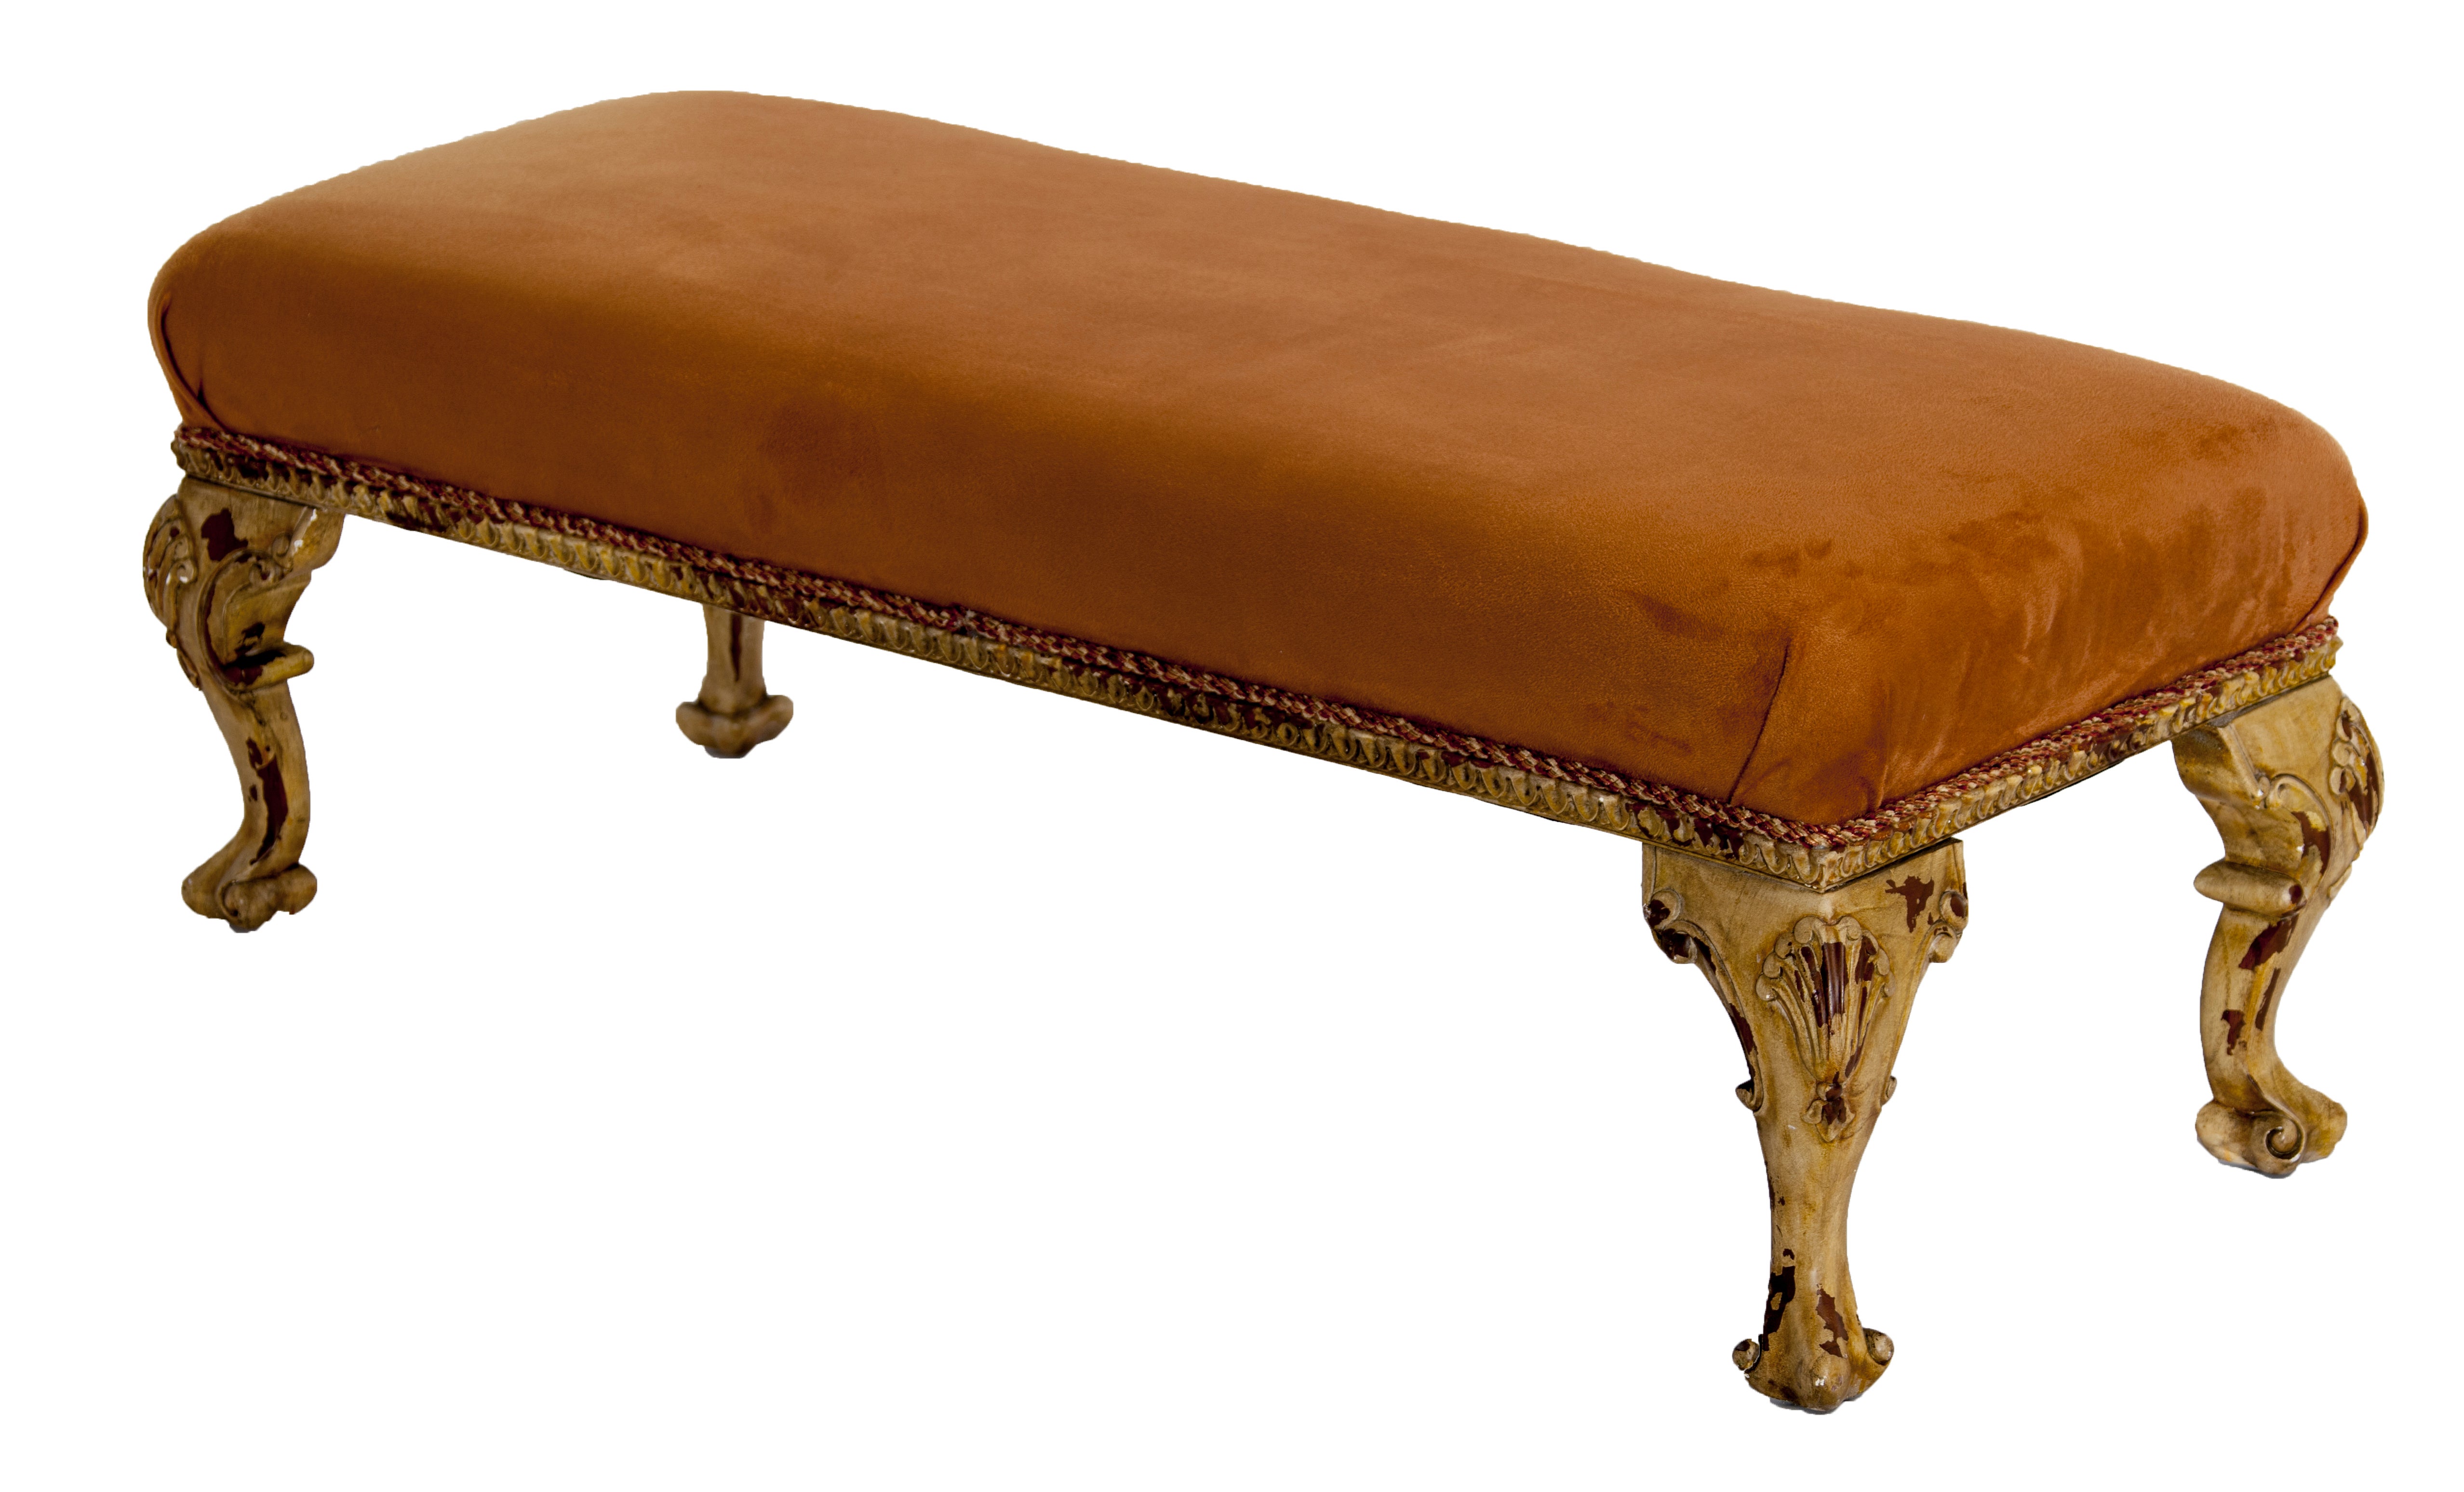 Rococo Style Suede Bench